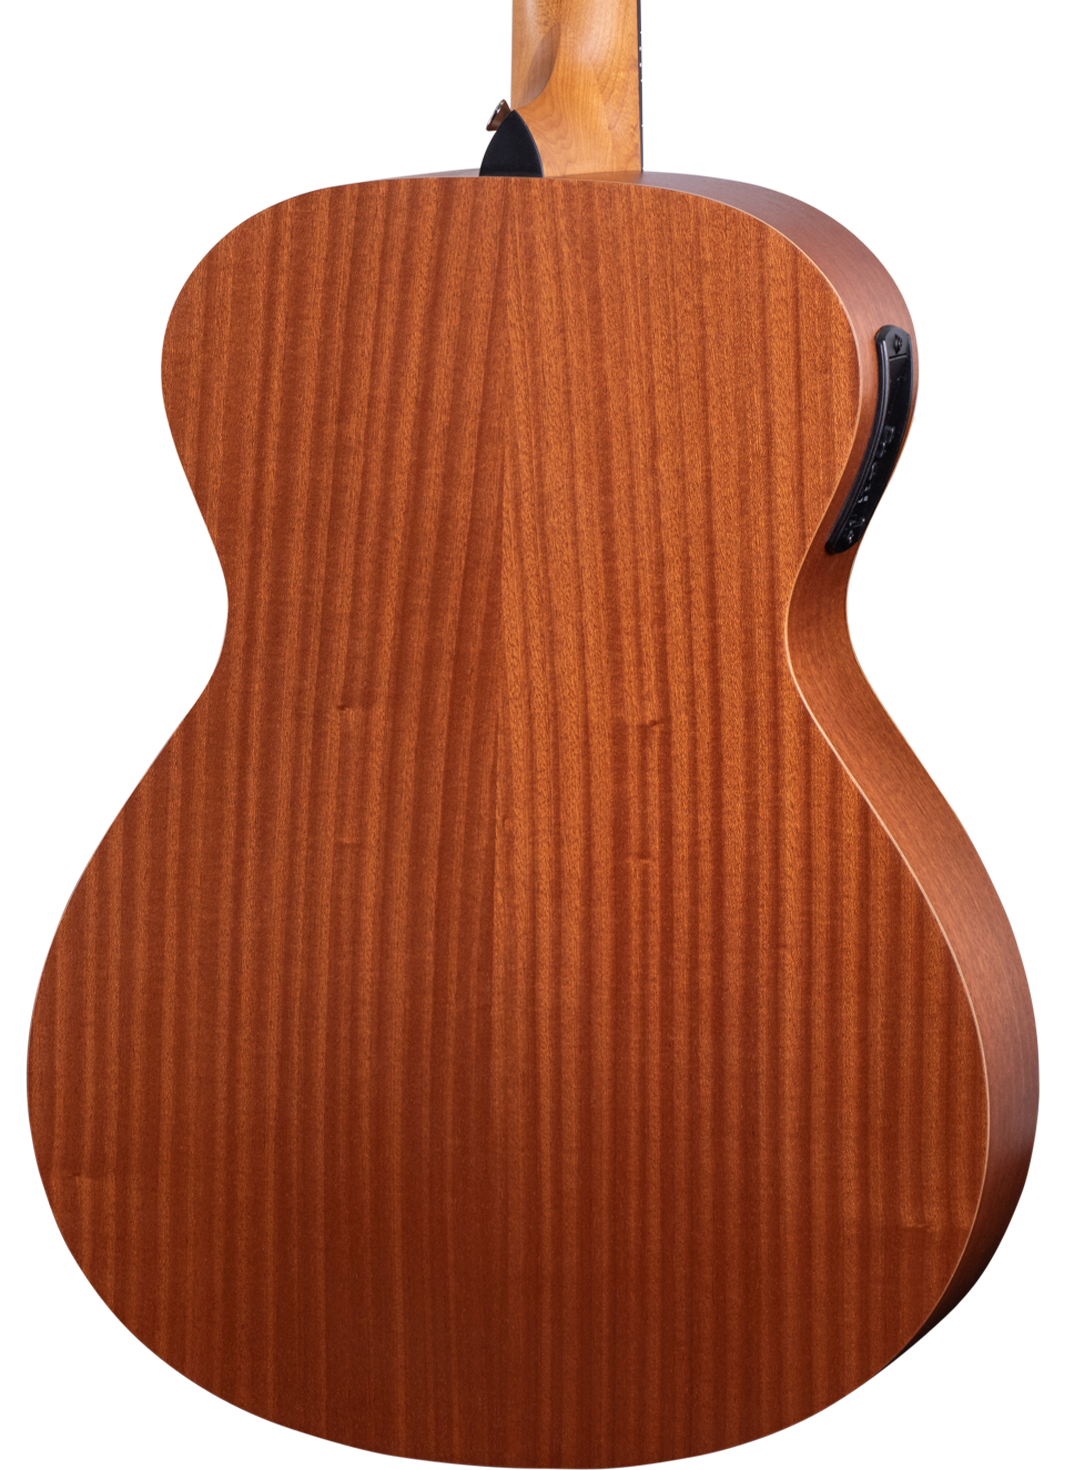 taylor-features-back-woods-layered-sapele-academy-12e